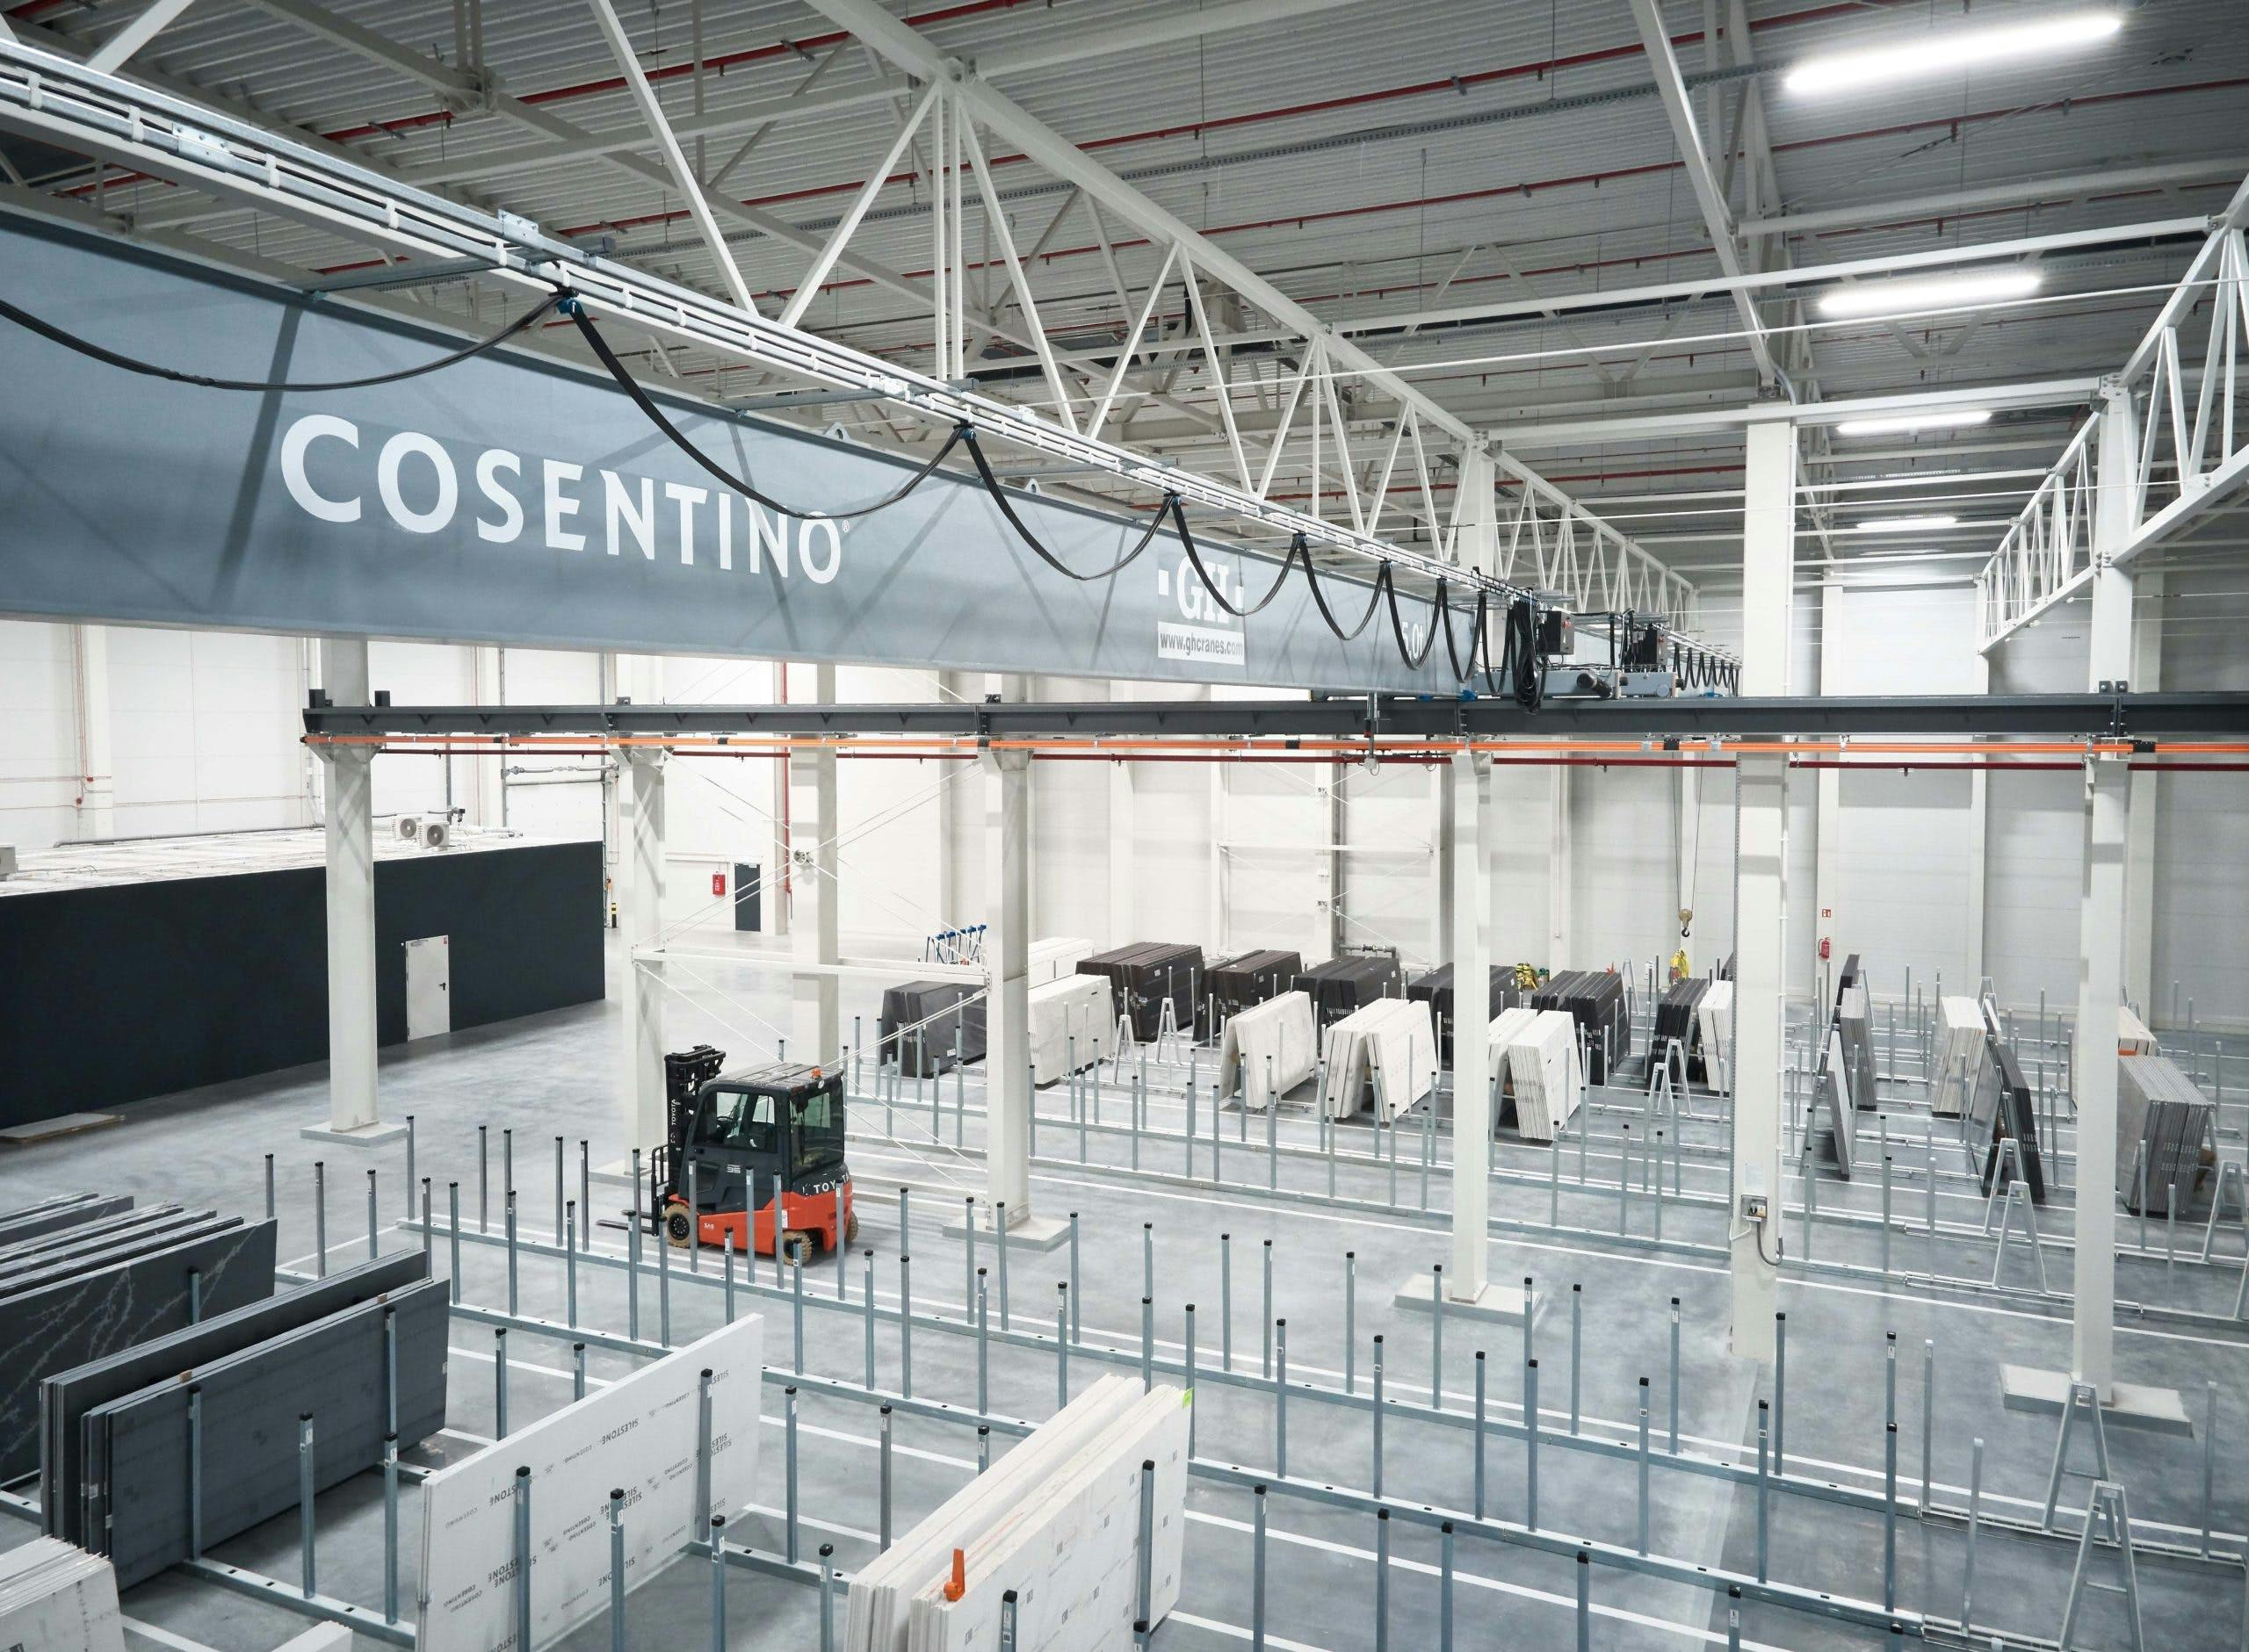 Image 32 of DJI 0002 min scaled 5 in Cosentino opens new distribution "Center" in Katowice - Cosentino